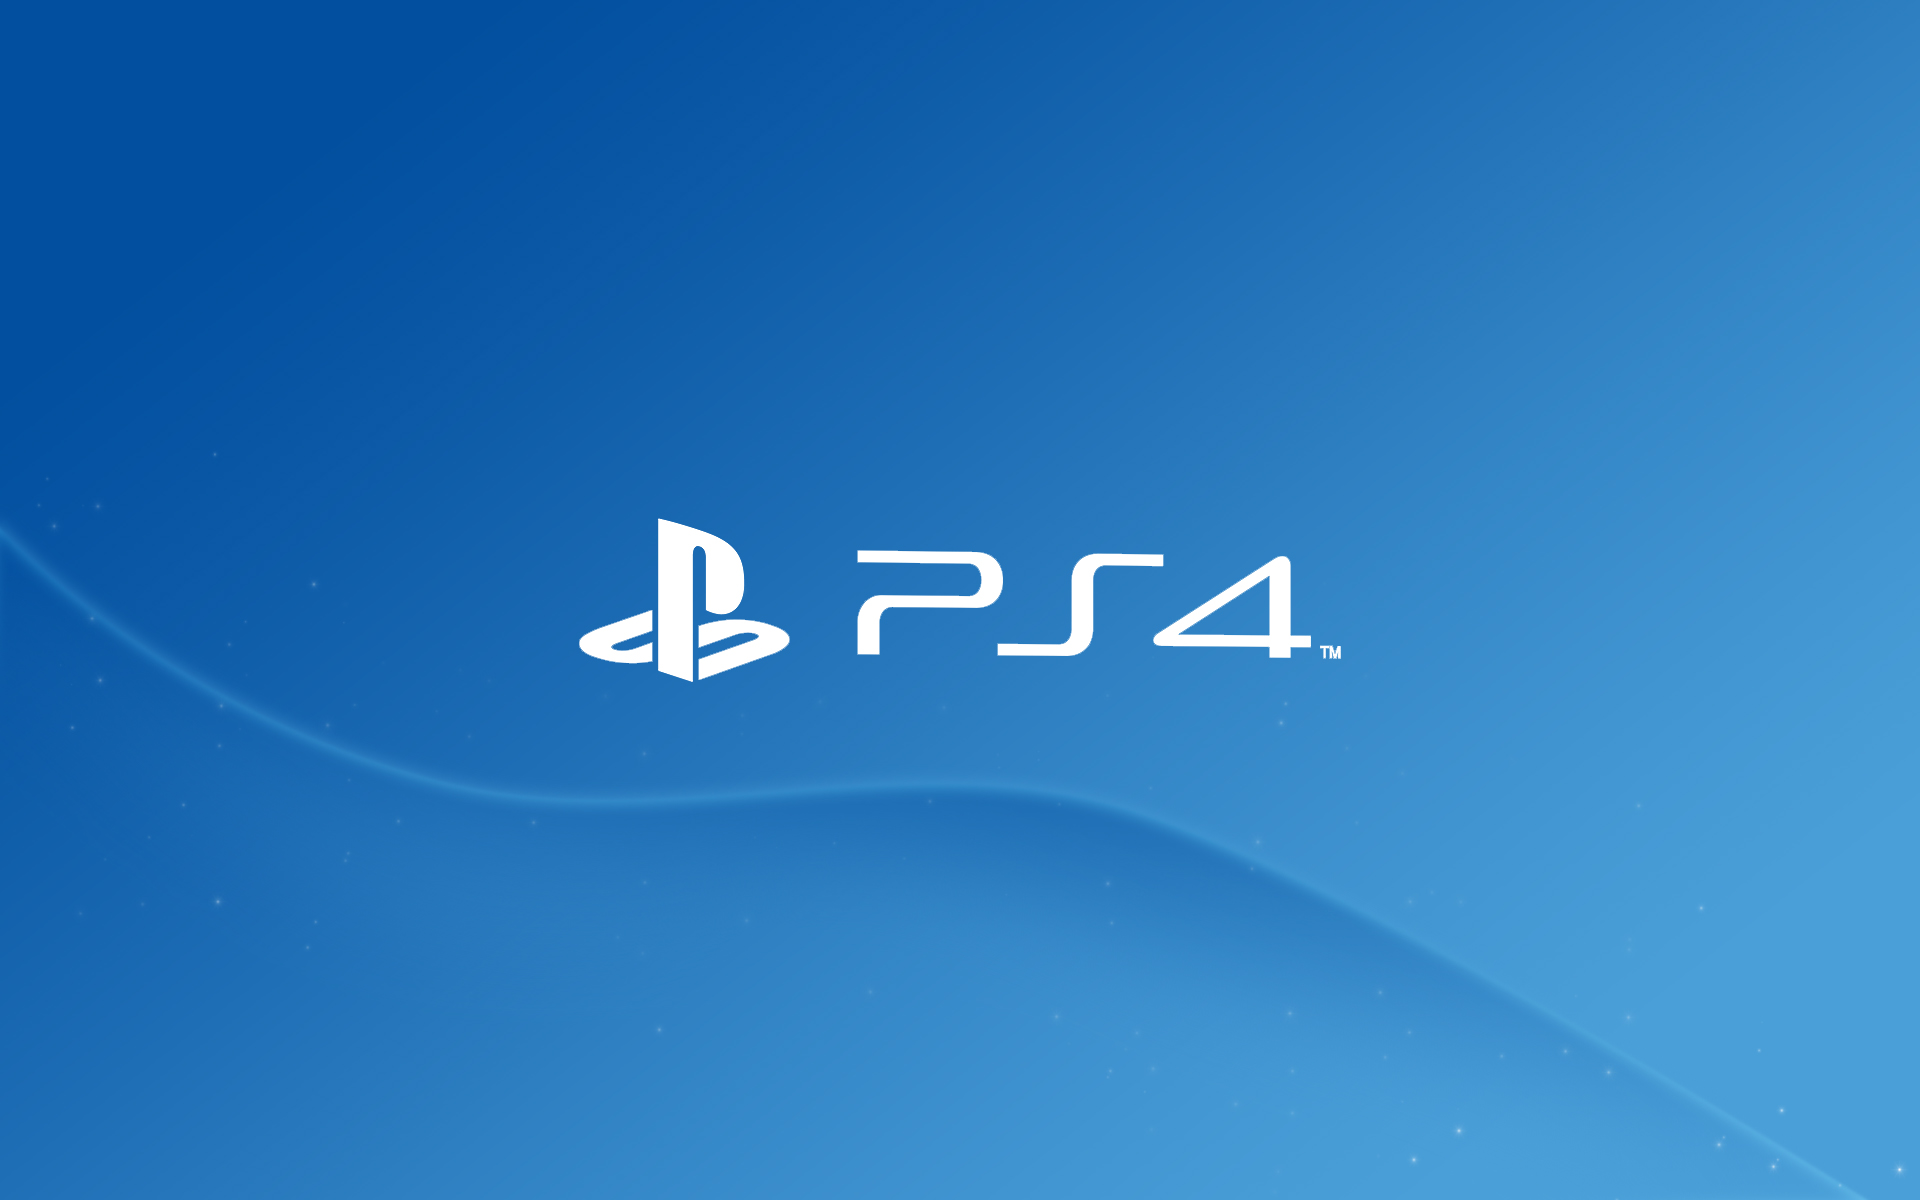 PlayStation 4 Wallpaper 4 by RLBDesigns on